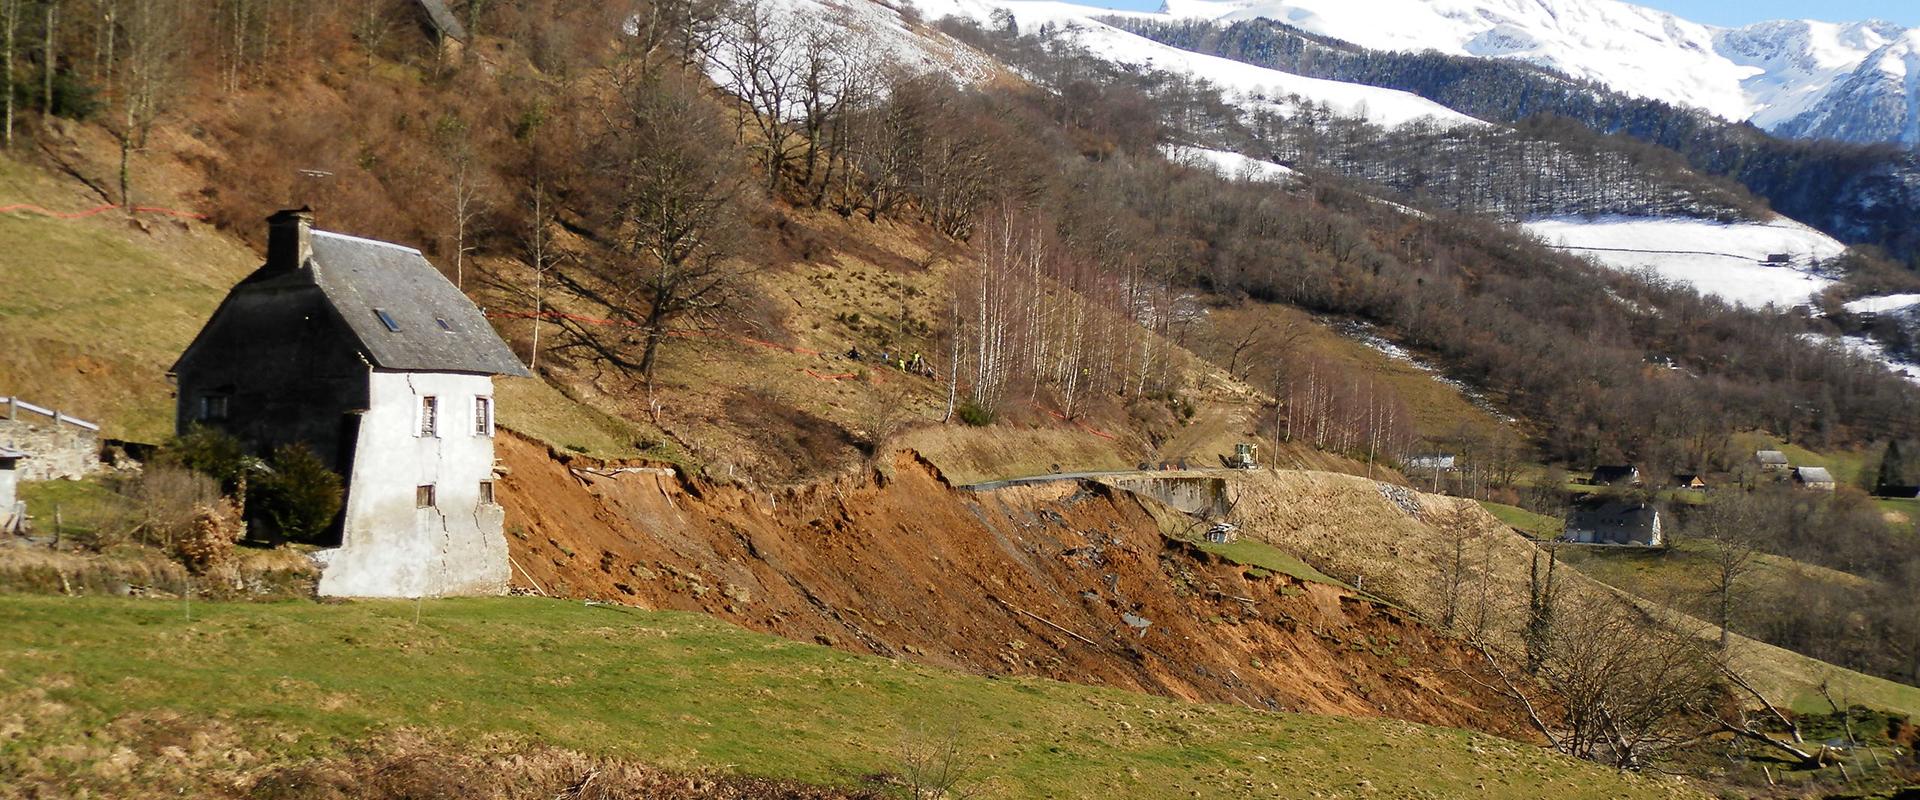 A mountain road and house destroyed by a landslip near Gazost, Midi-Pyrénées